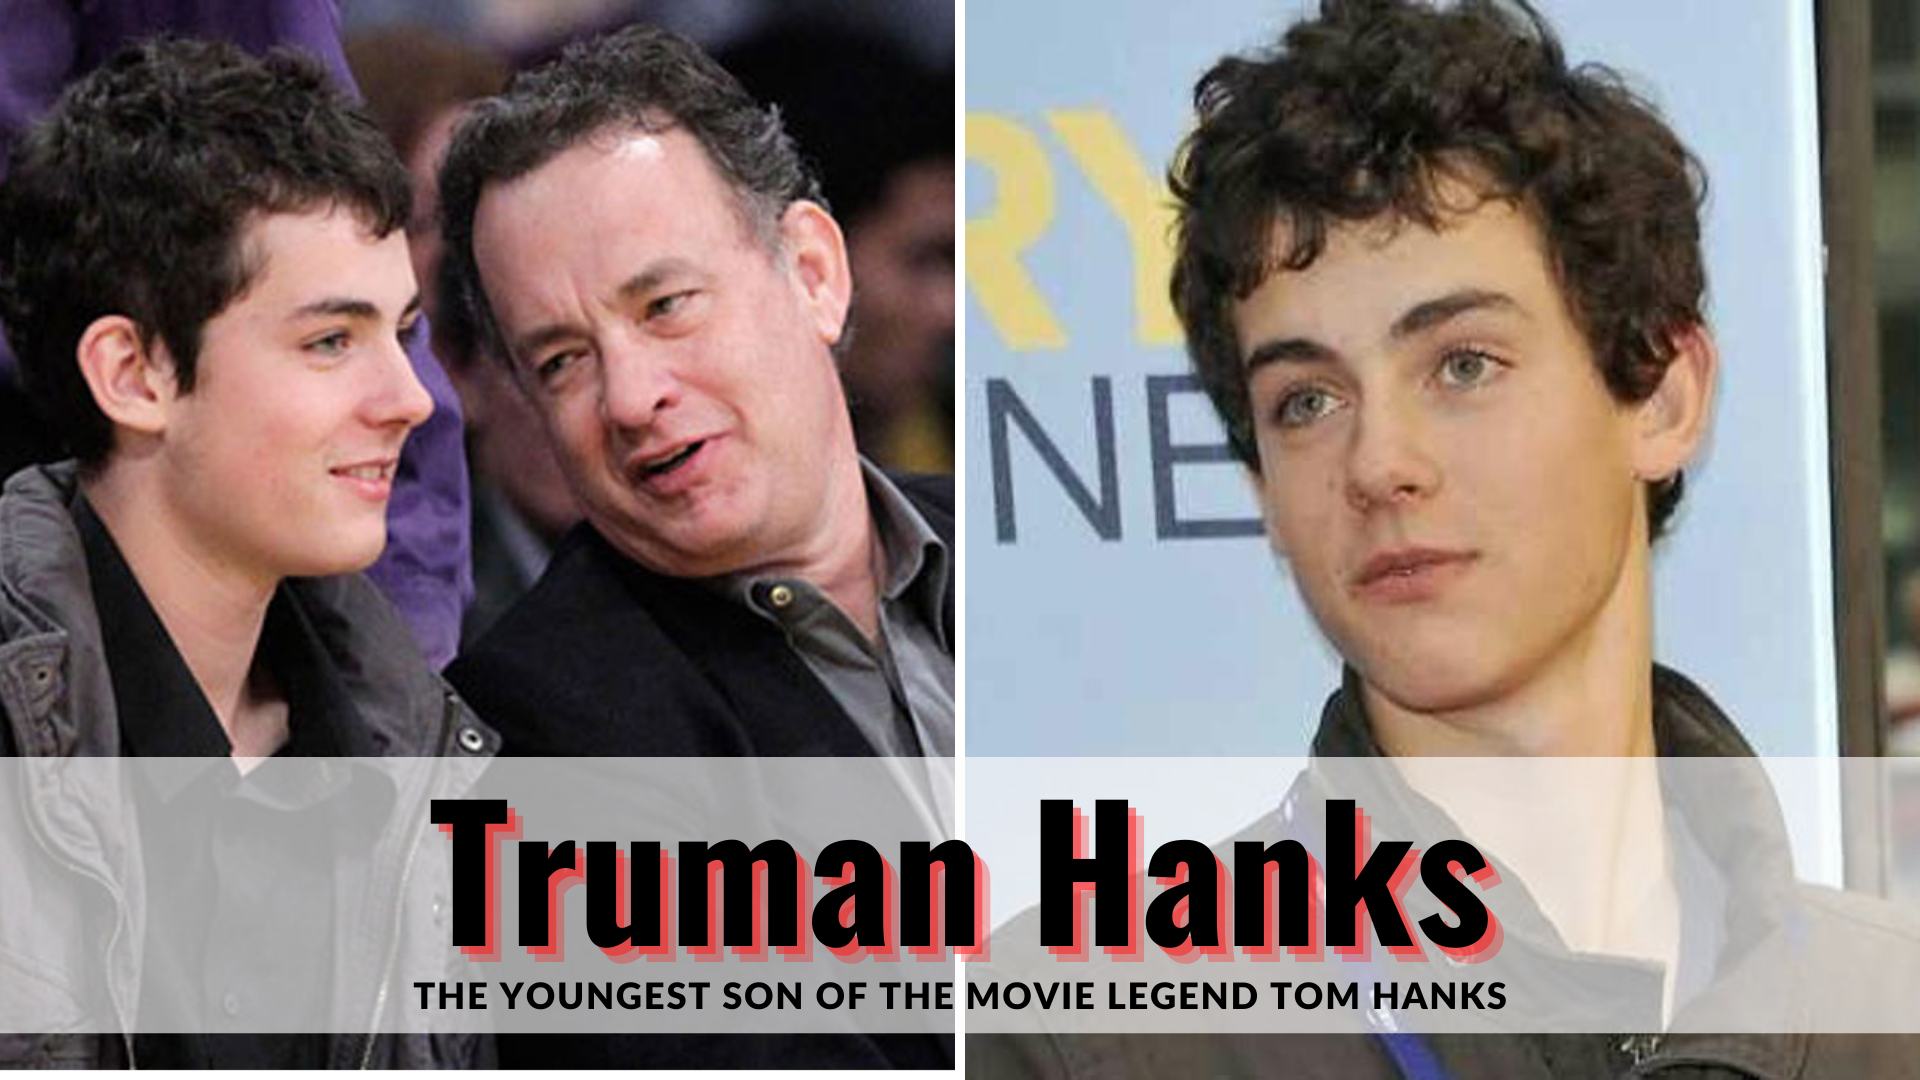 Truman Hanks - The Youngest Son Of The Movie Legend Tom Hanks